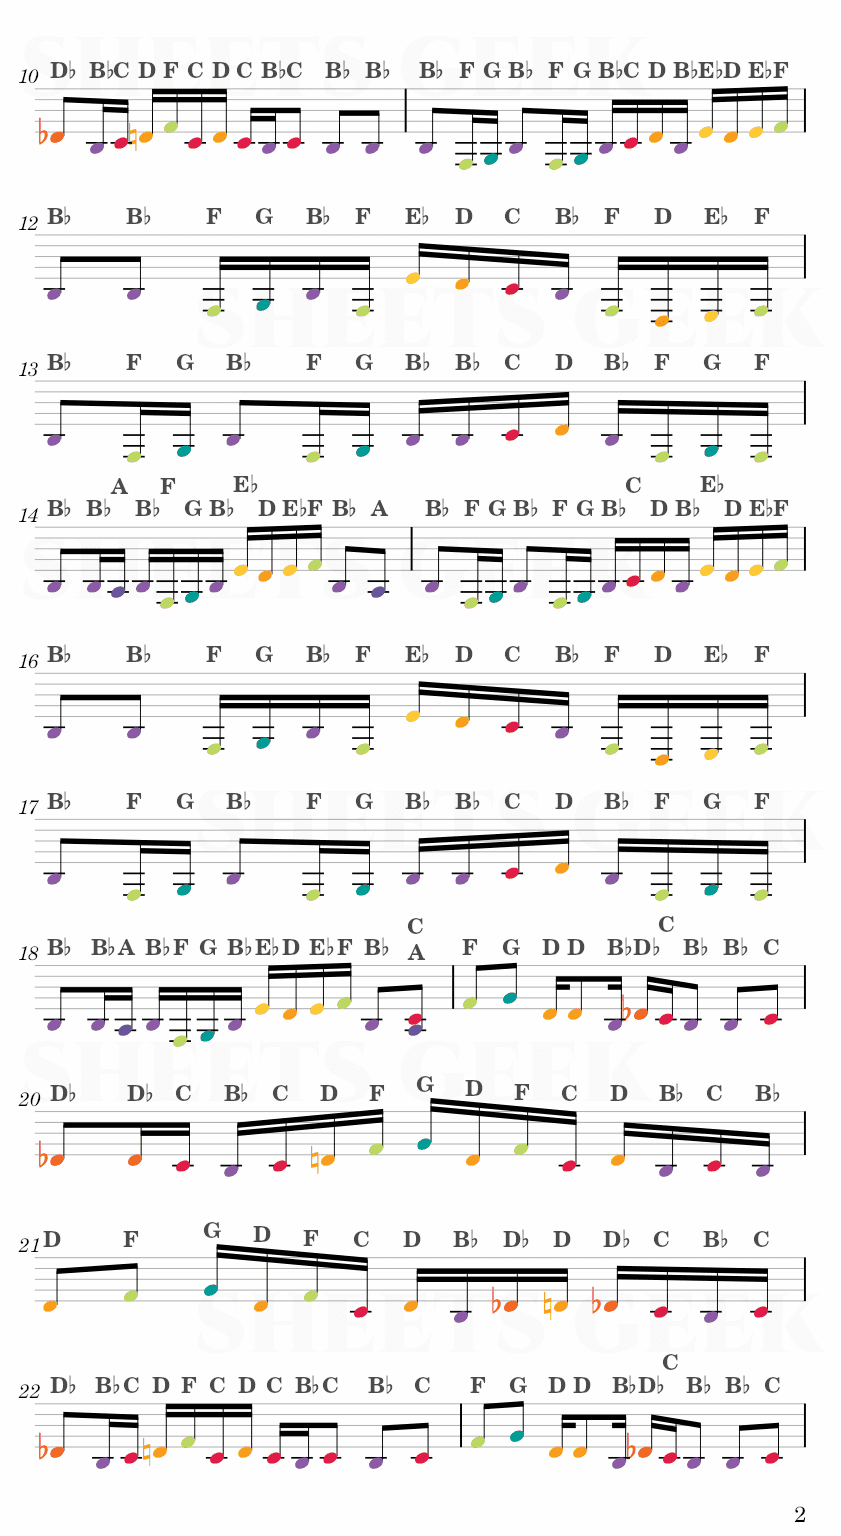 Nyan Cat Easy Sheet Music Free for piano, keyboard, flute, violin, sax, cello page 2